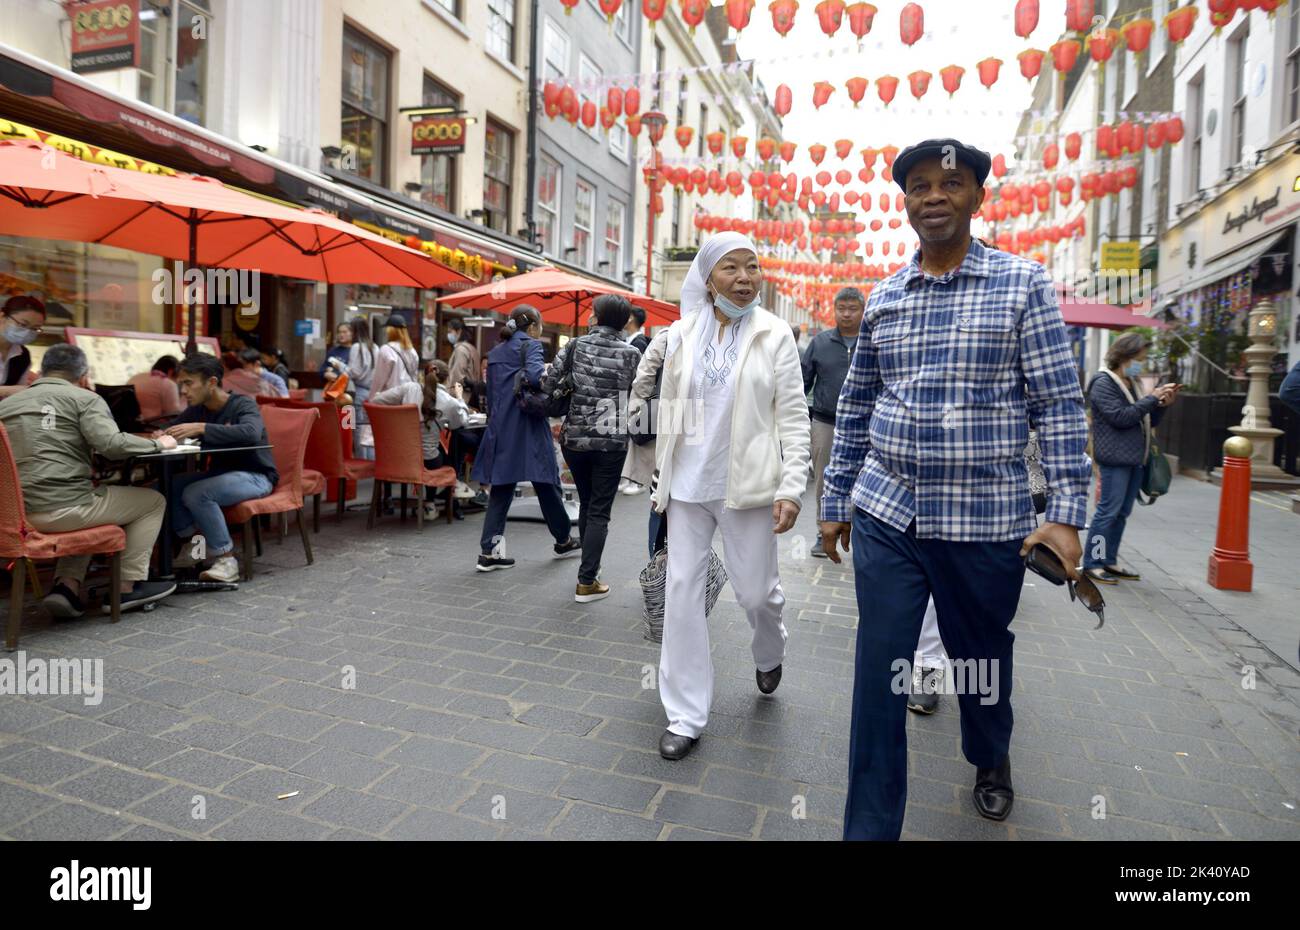 London, England, UK. Older ethnically diverse people in Chinatown Stock Photo